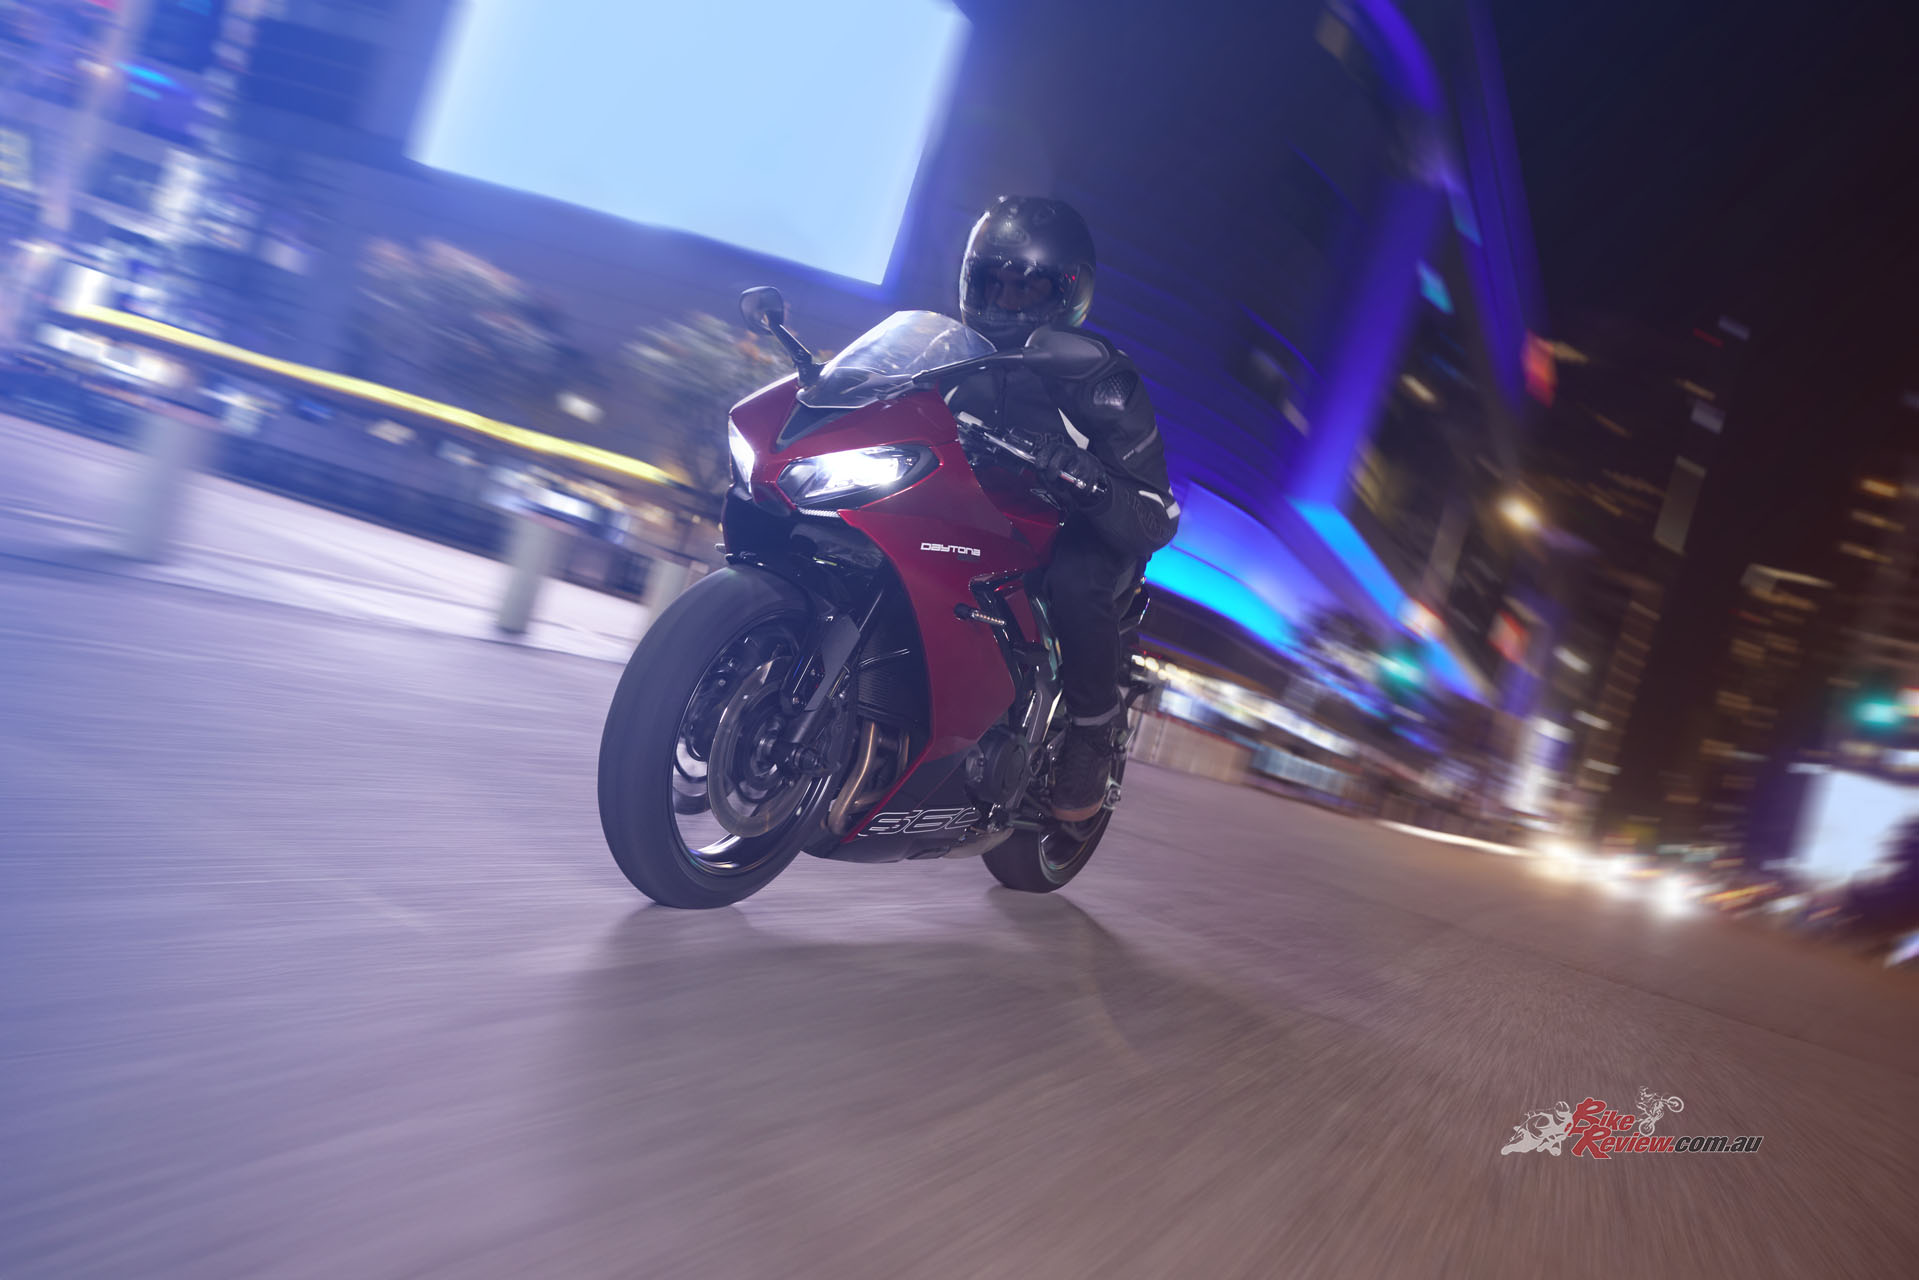 The new Daytona 660 benefits from years of race-winning chassis development. With its lightweight sports frame, top quality Showa 41mm upside down, big-piston forks and a Showa rear suspension unit.